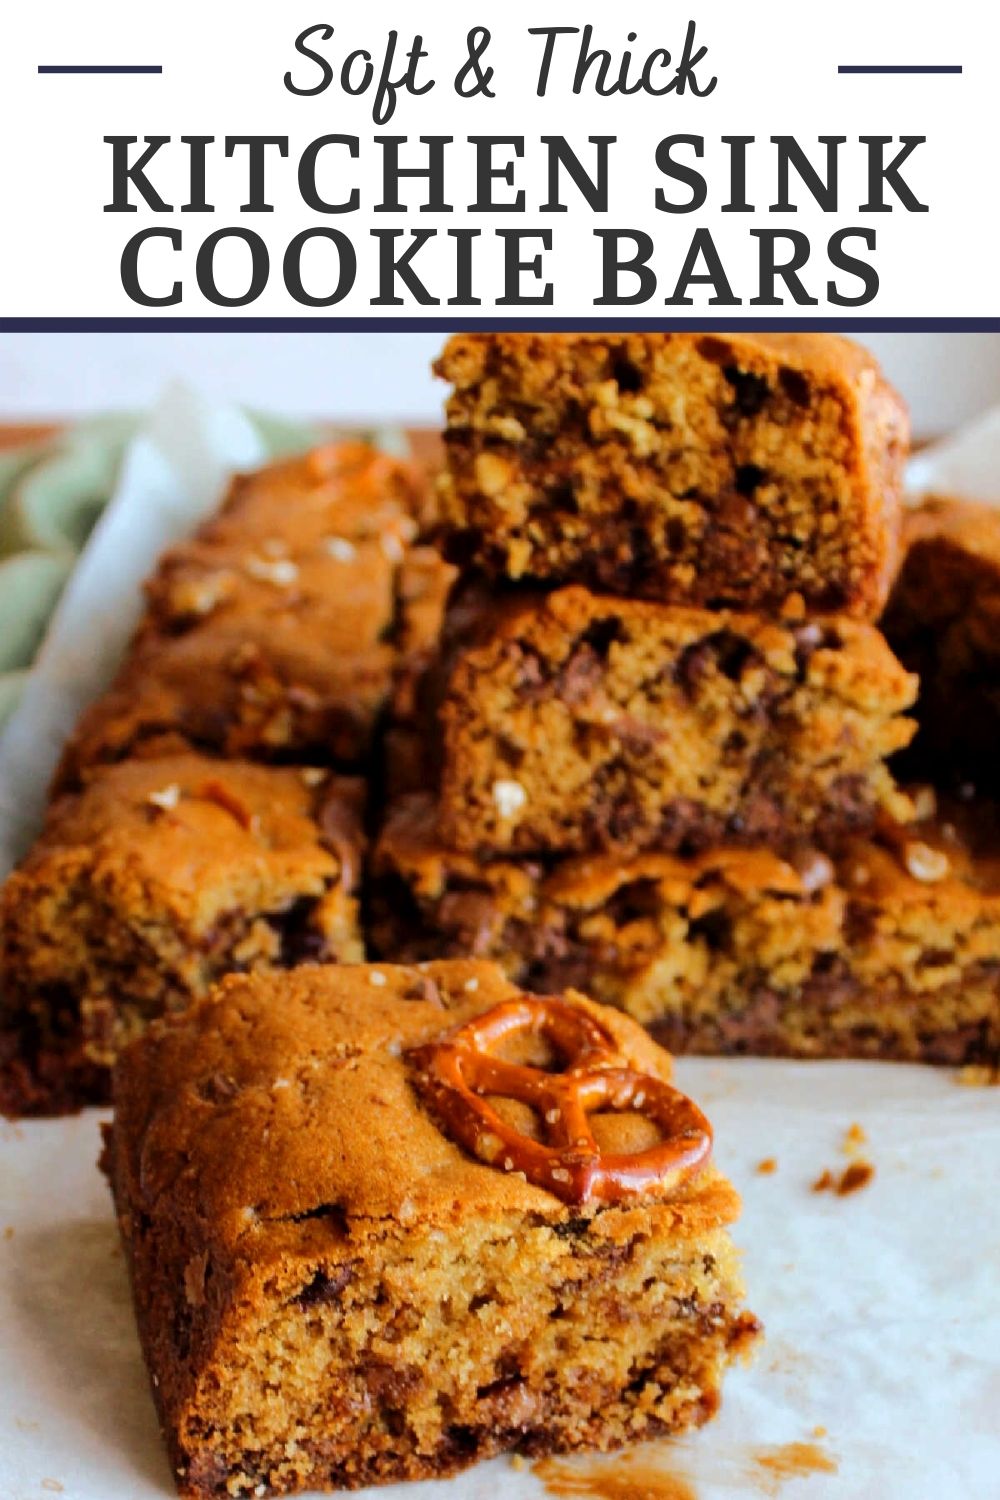 Kitchen sink cookie bars are soft, thick and loaded with goodies. There is chocolate, caramel and pretzels mixed into this bar making it like the Panera cookie only better!